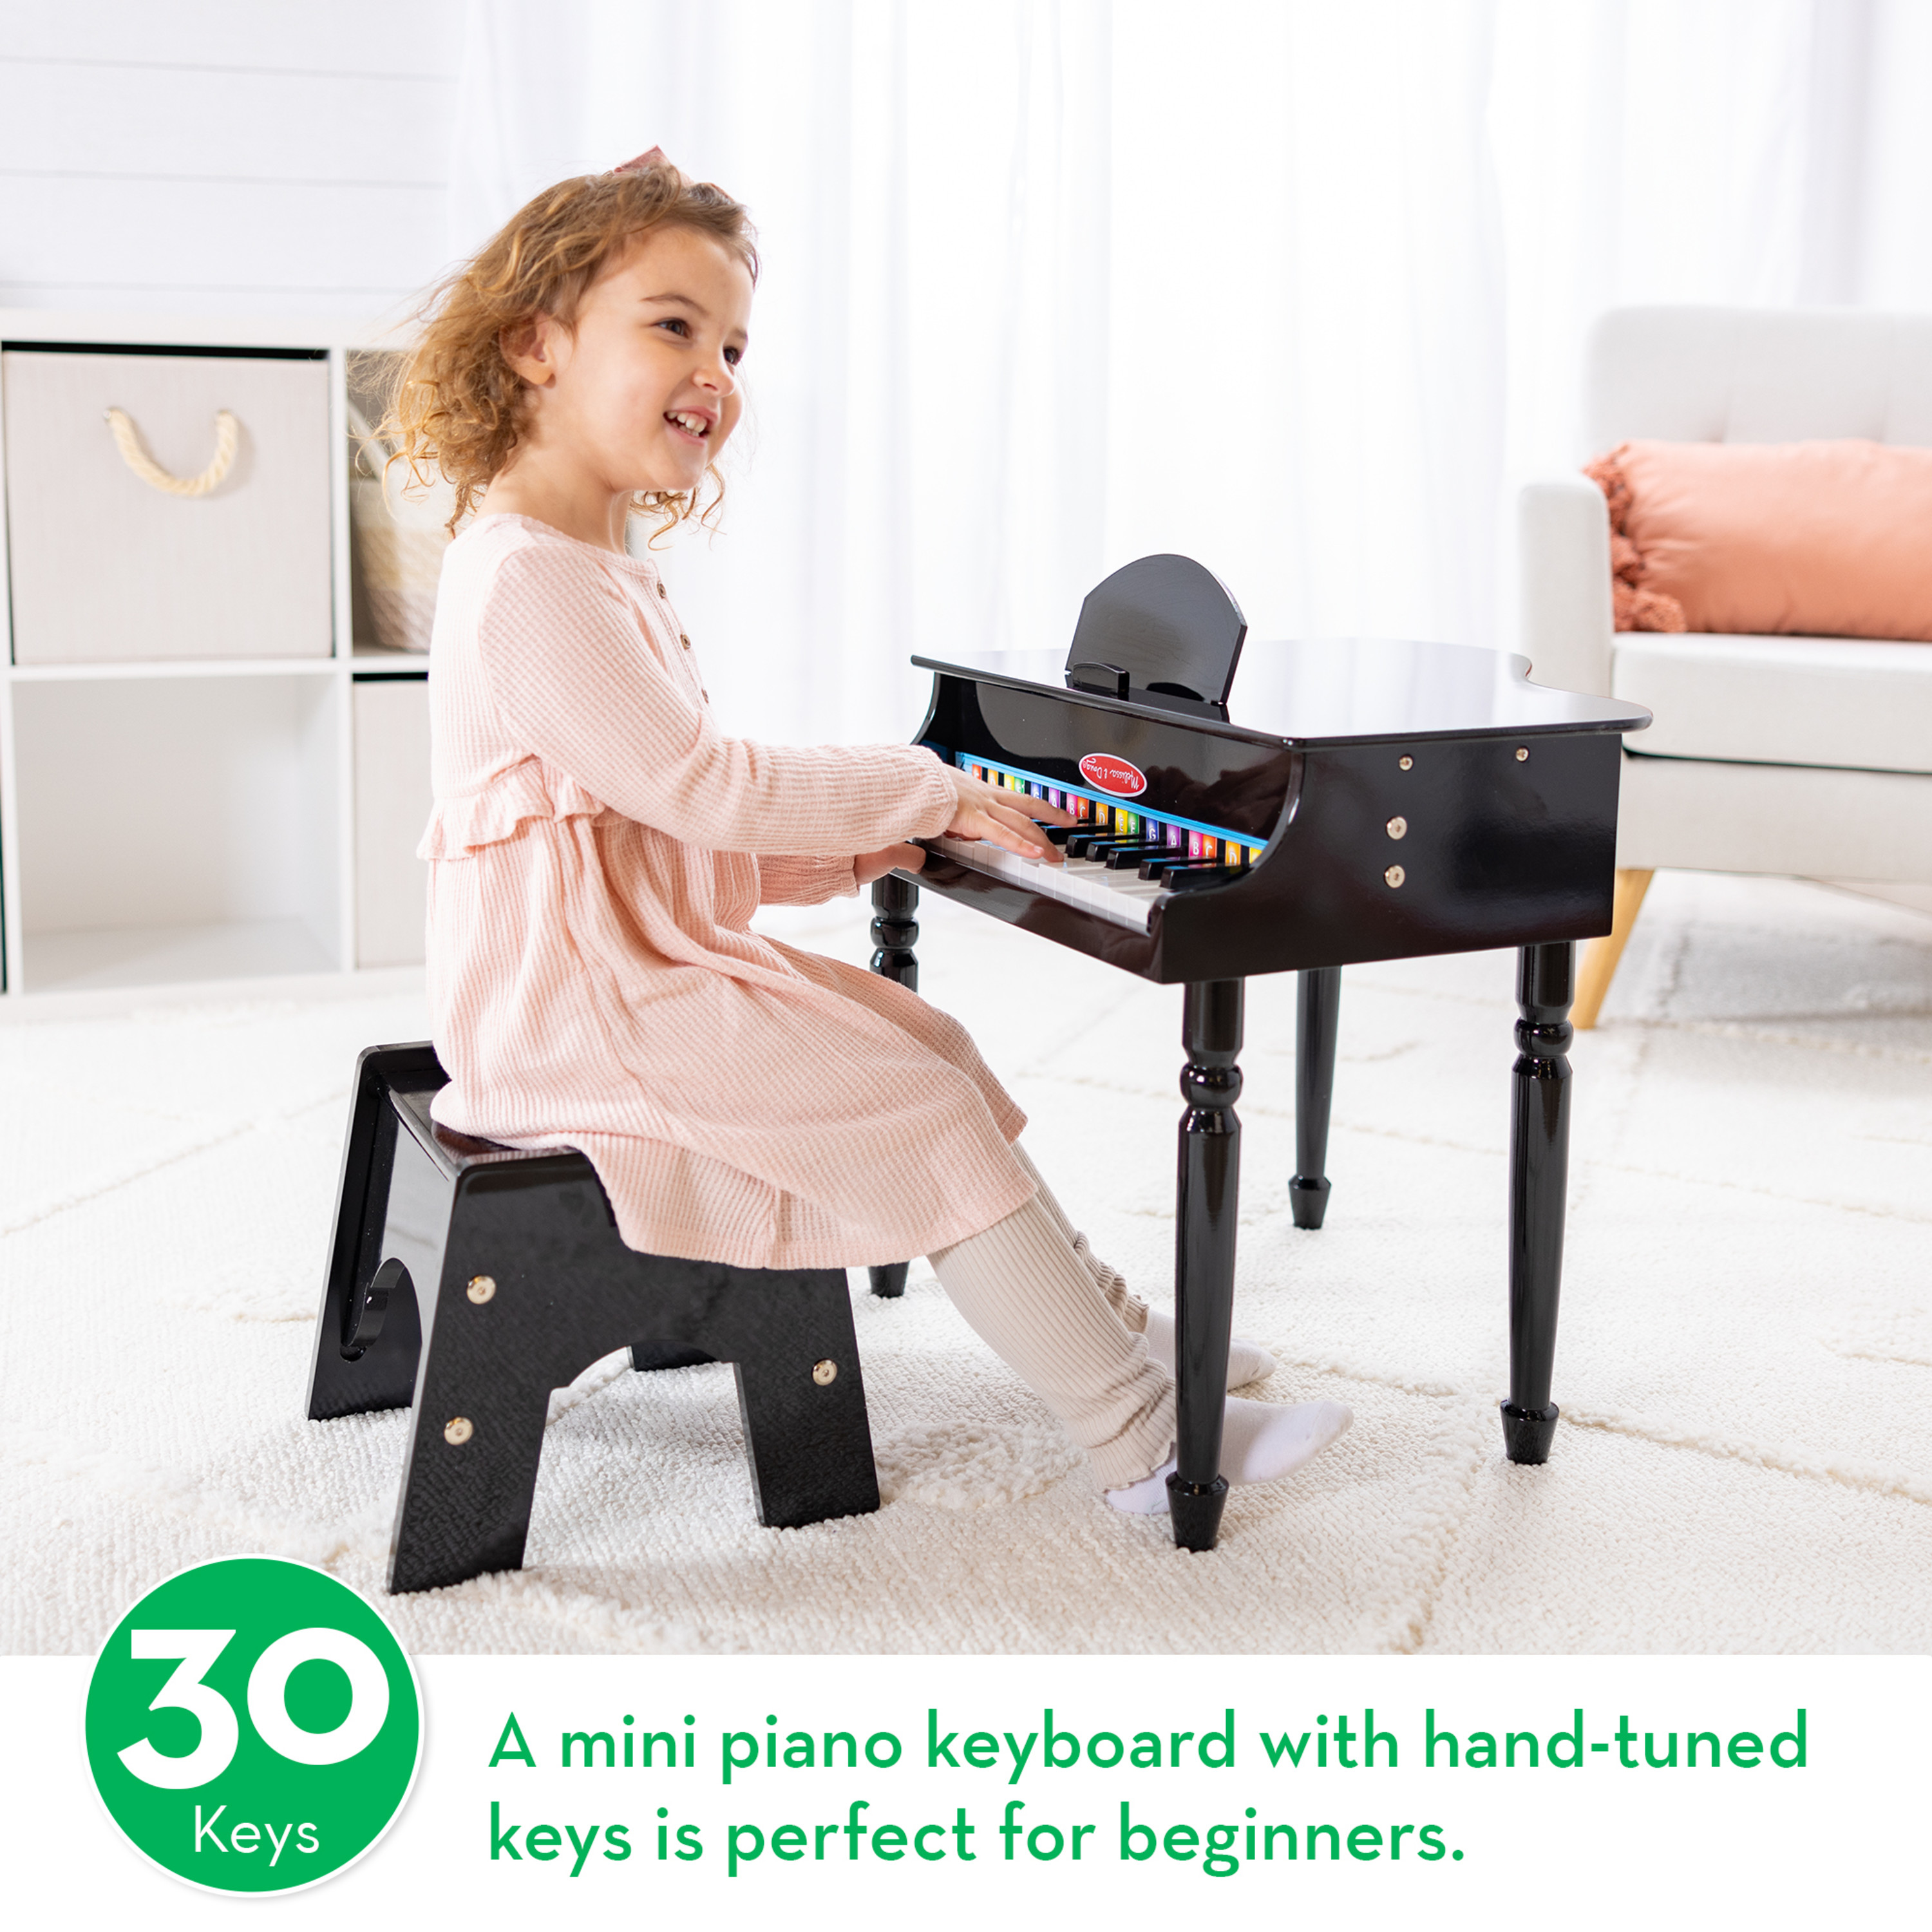 Melissa & Doug Learn-To-Play Classic Grand Piano Toy For Kids With 30 Keys, Color-Coded Songbook, and Non-Tip Bench - image 3 of 10